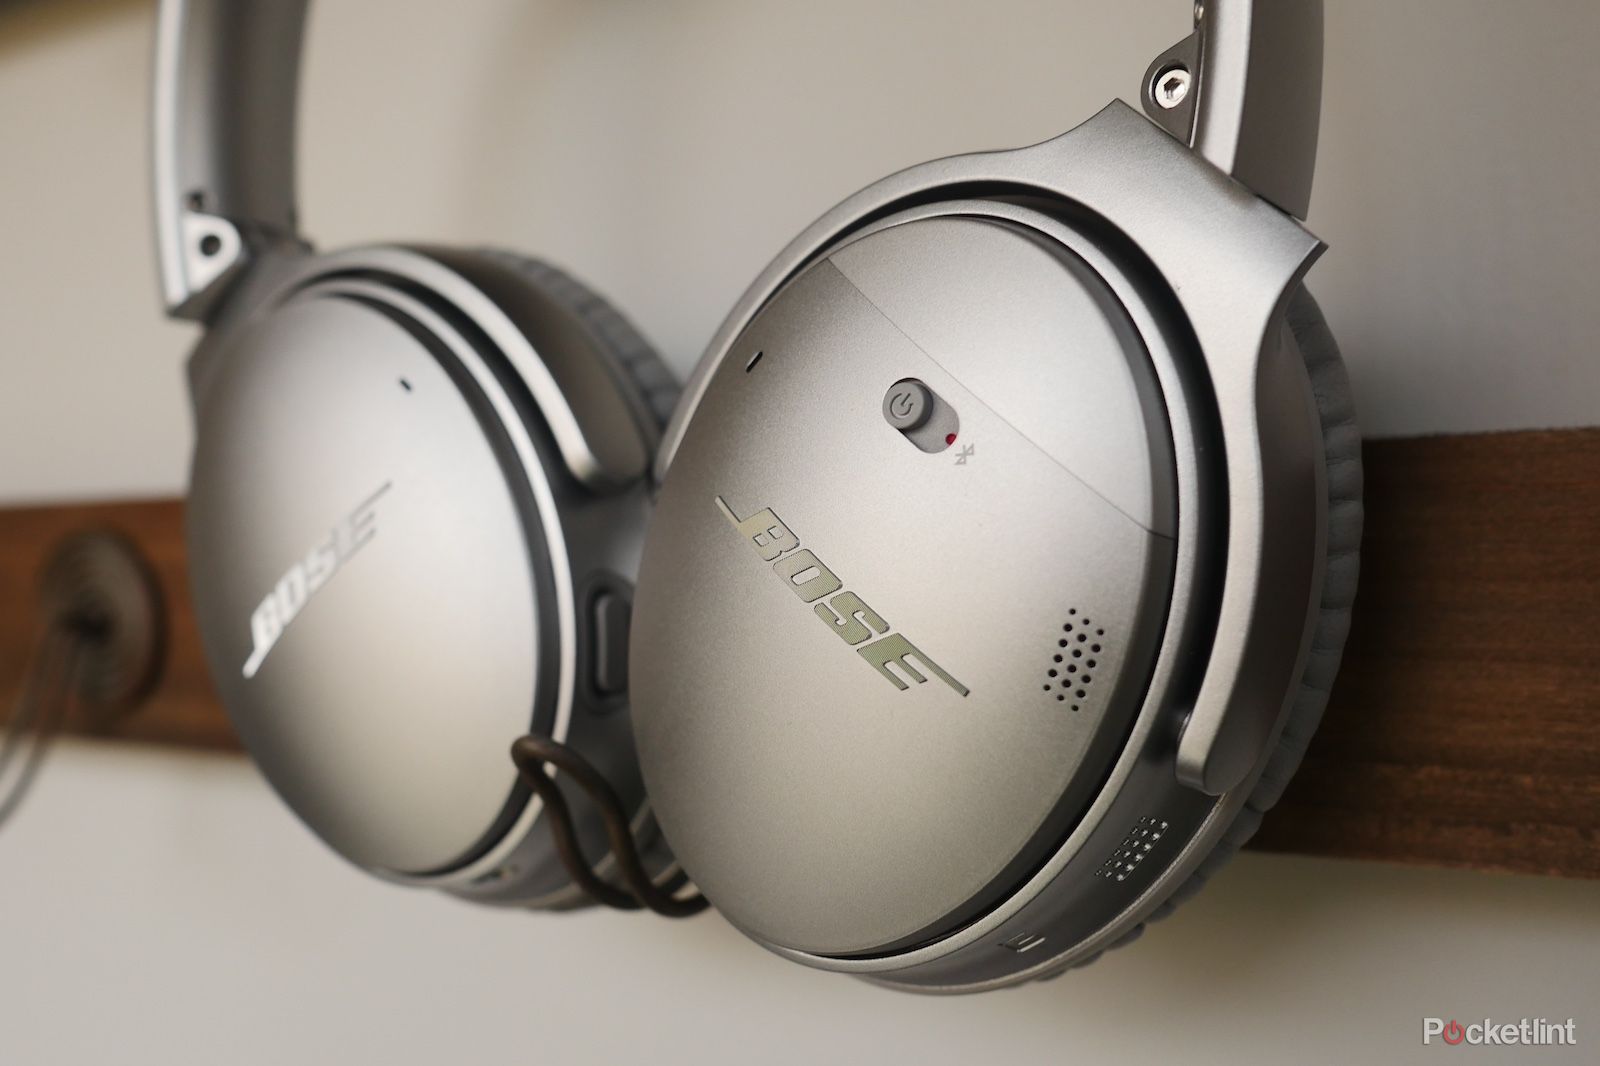 Bose Could Be Planning To Enter The Gaming Headset Market With A New Qc35 Ii Version image 1